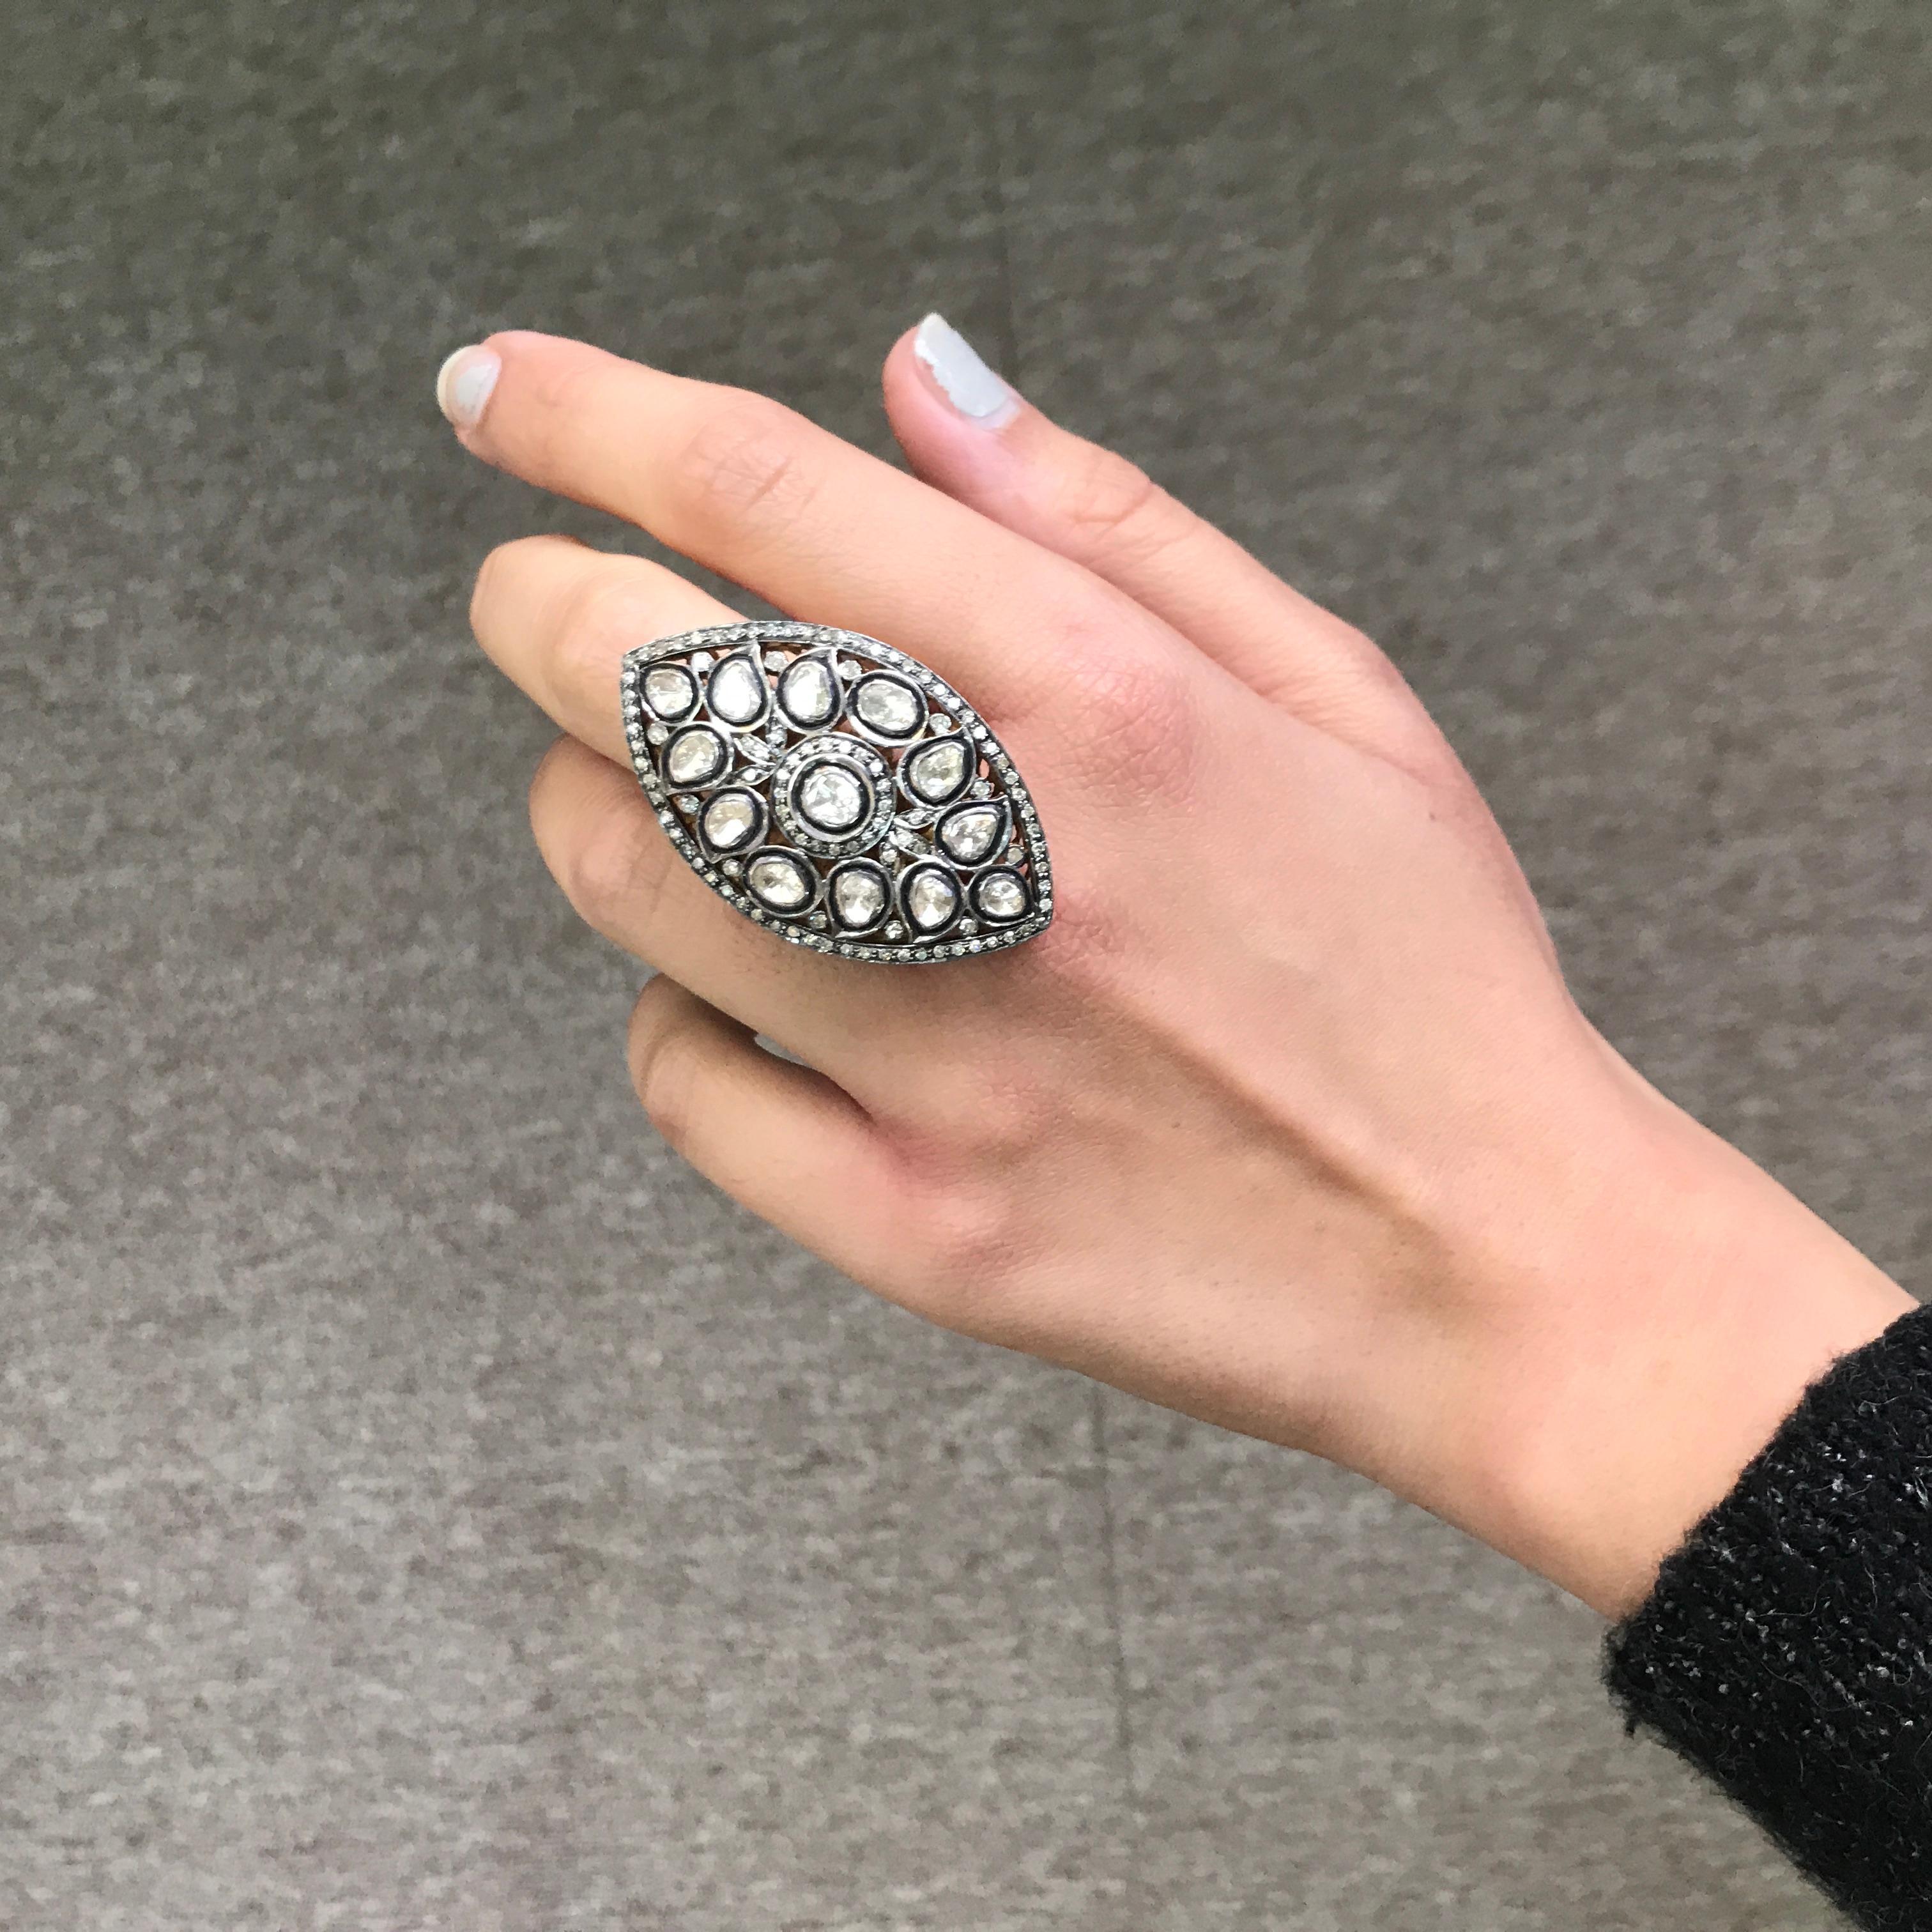 A stunning, statement ring with around 3 carat rose cut white diamonds set in silver. The black rhodium polish gives the ring a beautiful, antique look. Currently a size 6.5, can be resized. 